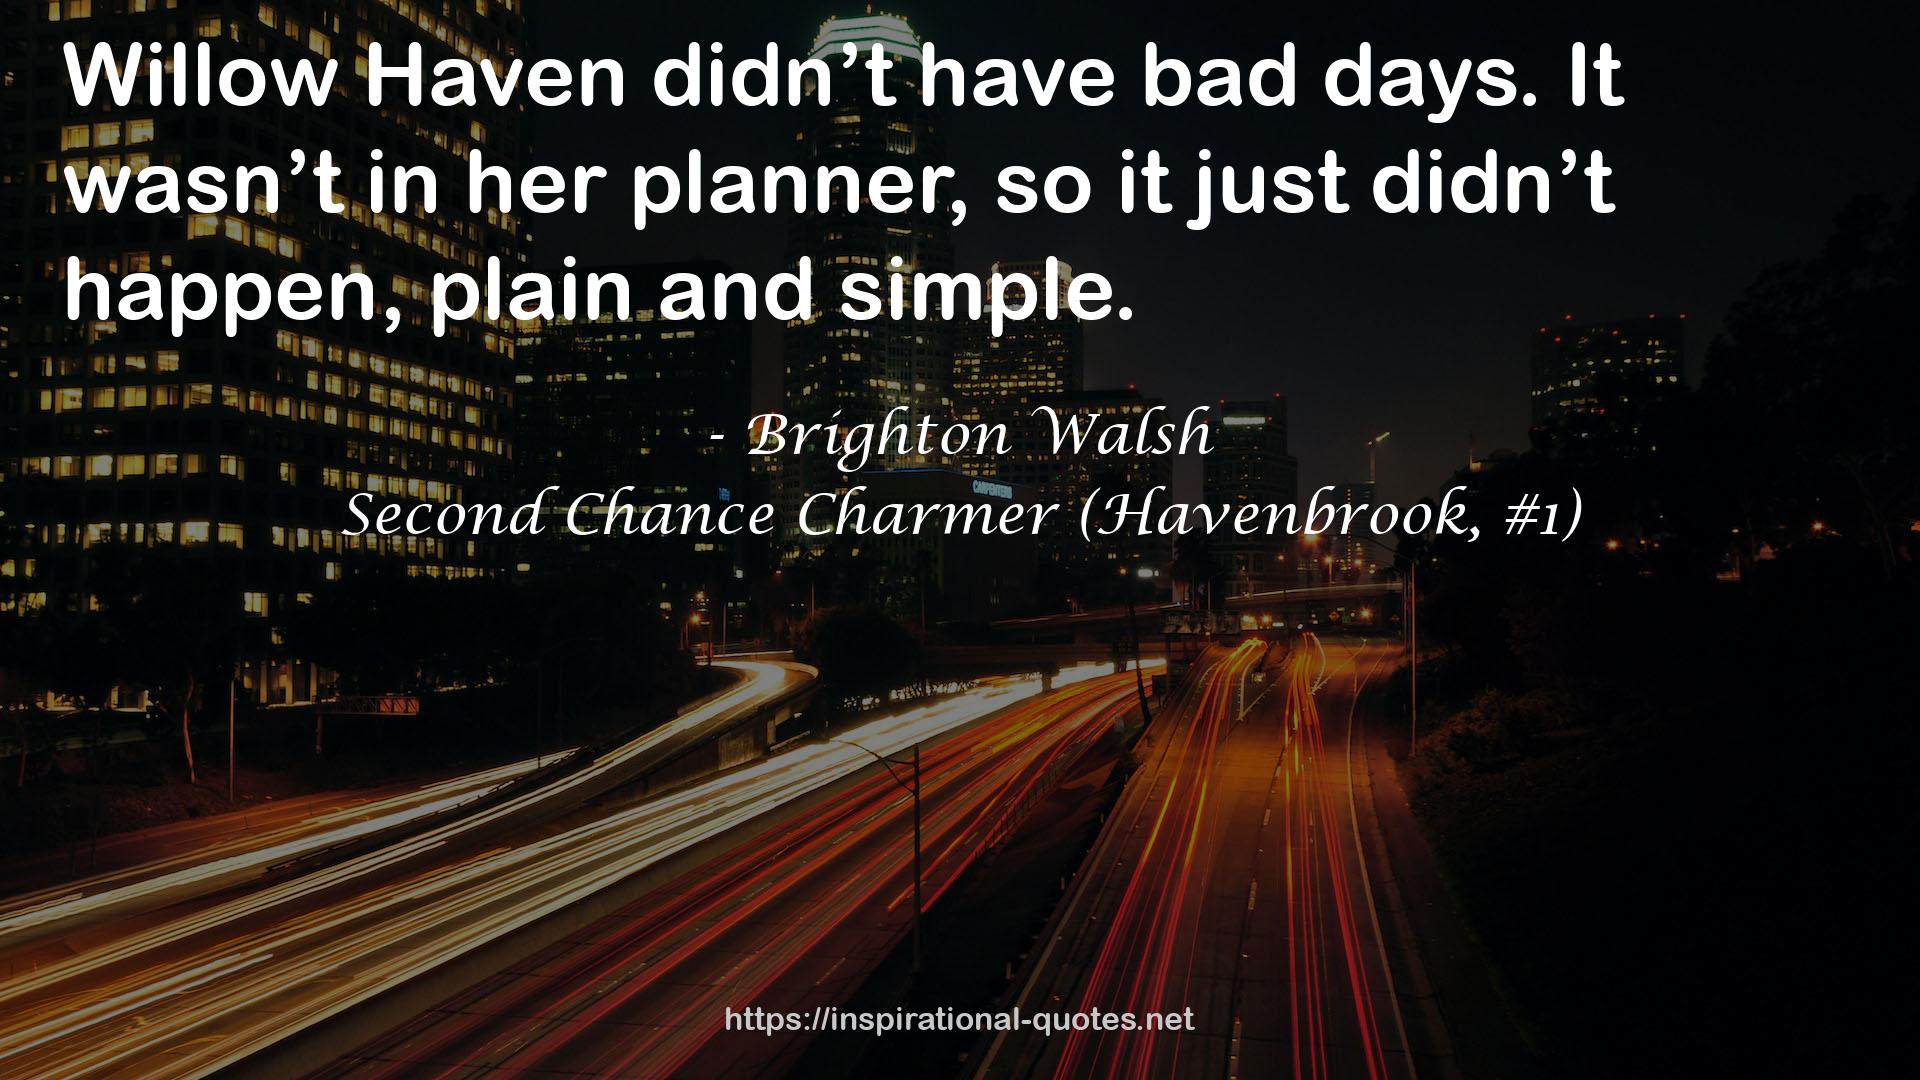 Second Chance Charmer (Havenbrook, #1) QUOTES